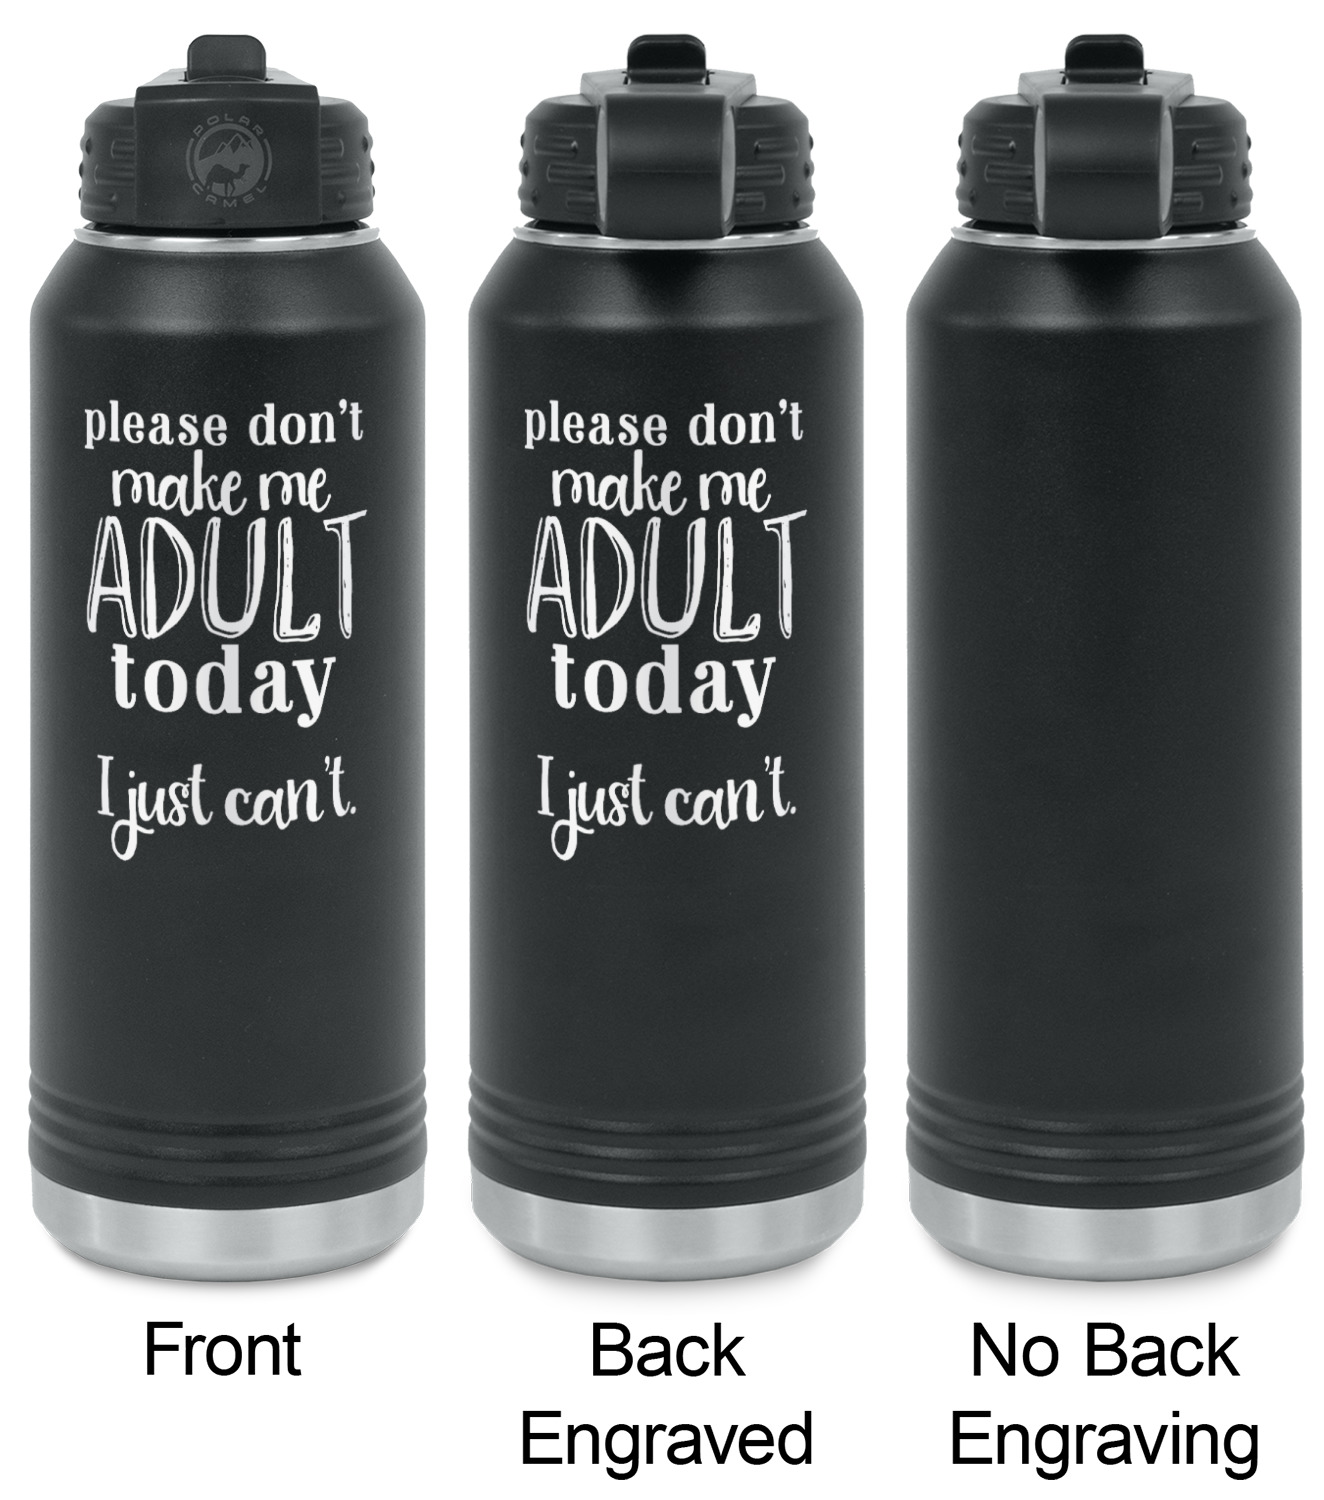 https://www.youcustomizeit.com/common/MAKE/1038321/Funny-Quotes-and-Sayings-Laser-Engraved-Water-Bottles-2-Styles-Front-Back-View.jpg?lm=1666017663